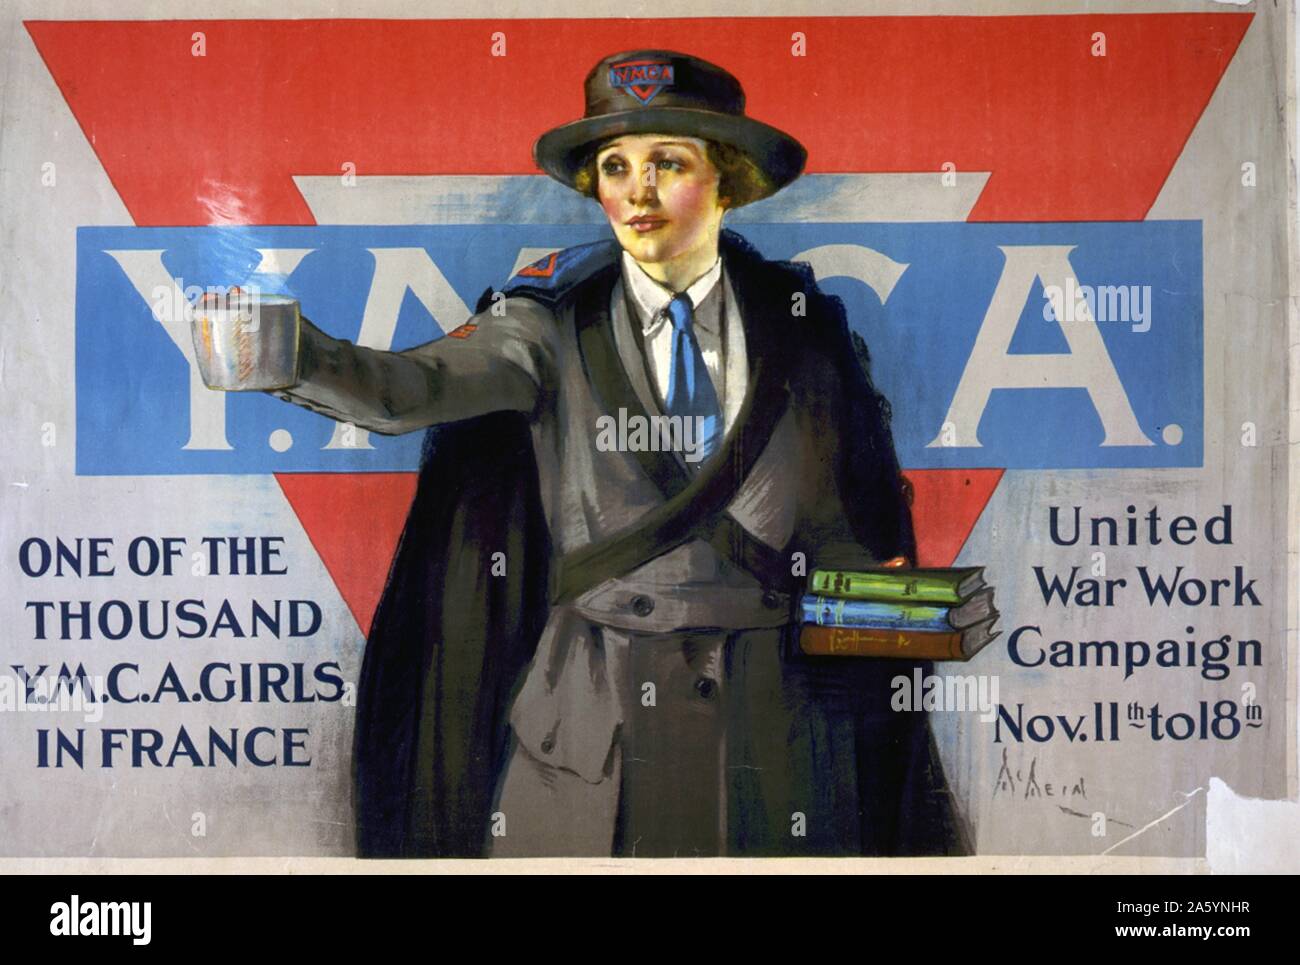 One of the thousand girls in France. Poster by the United War Work Campaign Nov 1918. Artist: Neysa McMein, Poster showing a woman in a Y.M.C.A. uniform offering a steaming cup of coffee and books; large red triangle is behind her. Stock Photo